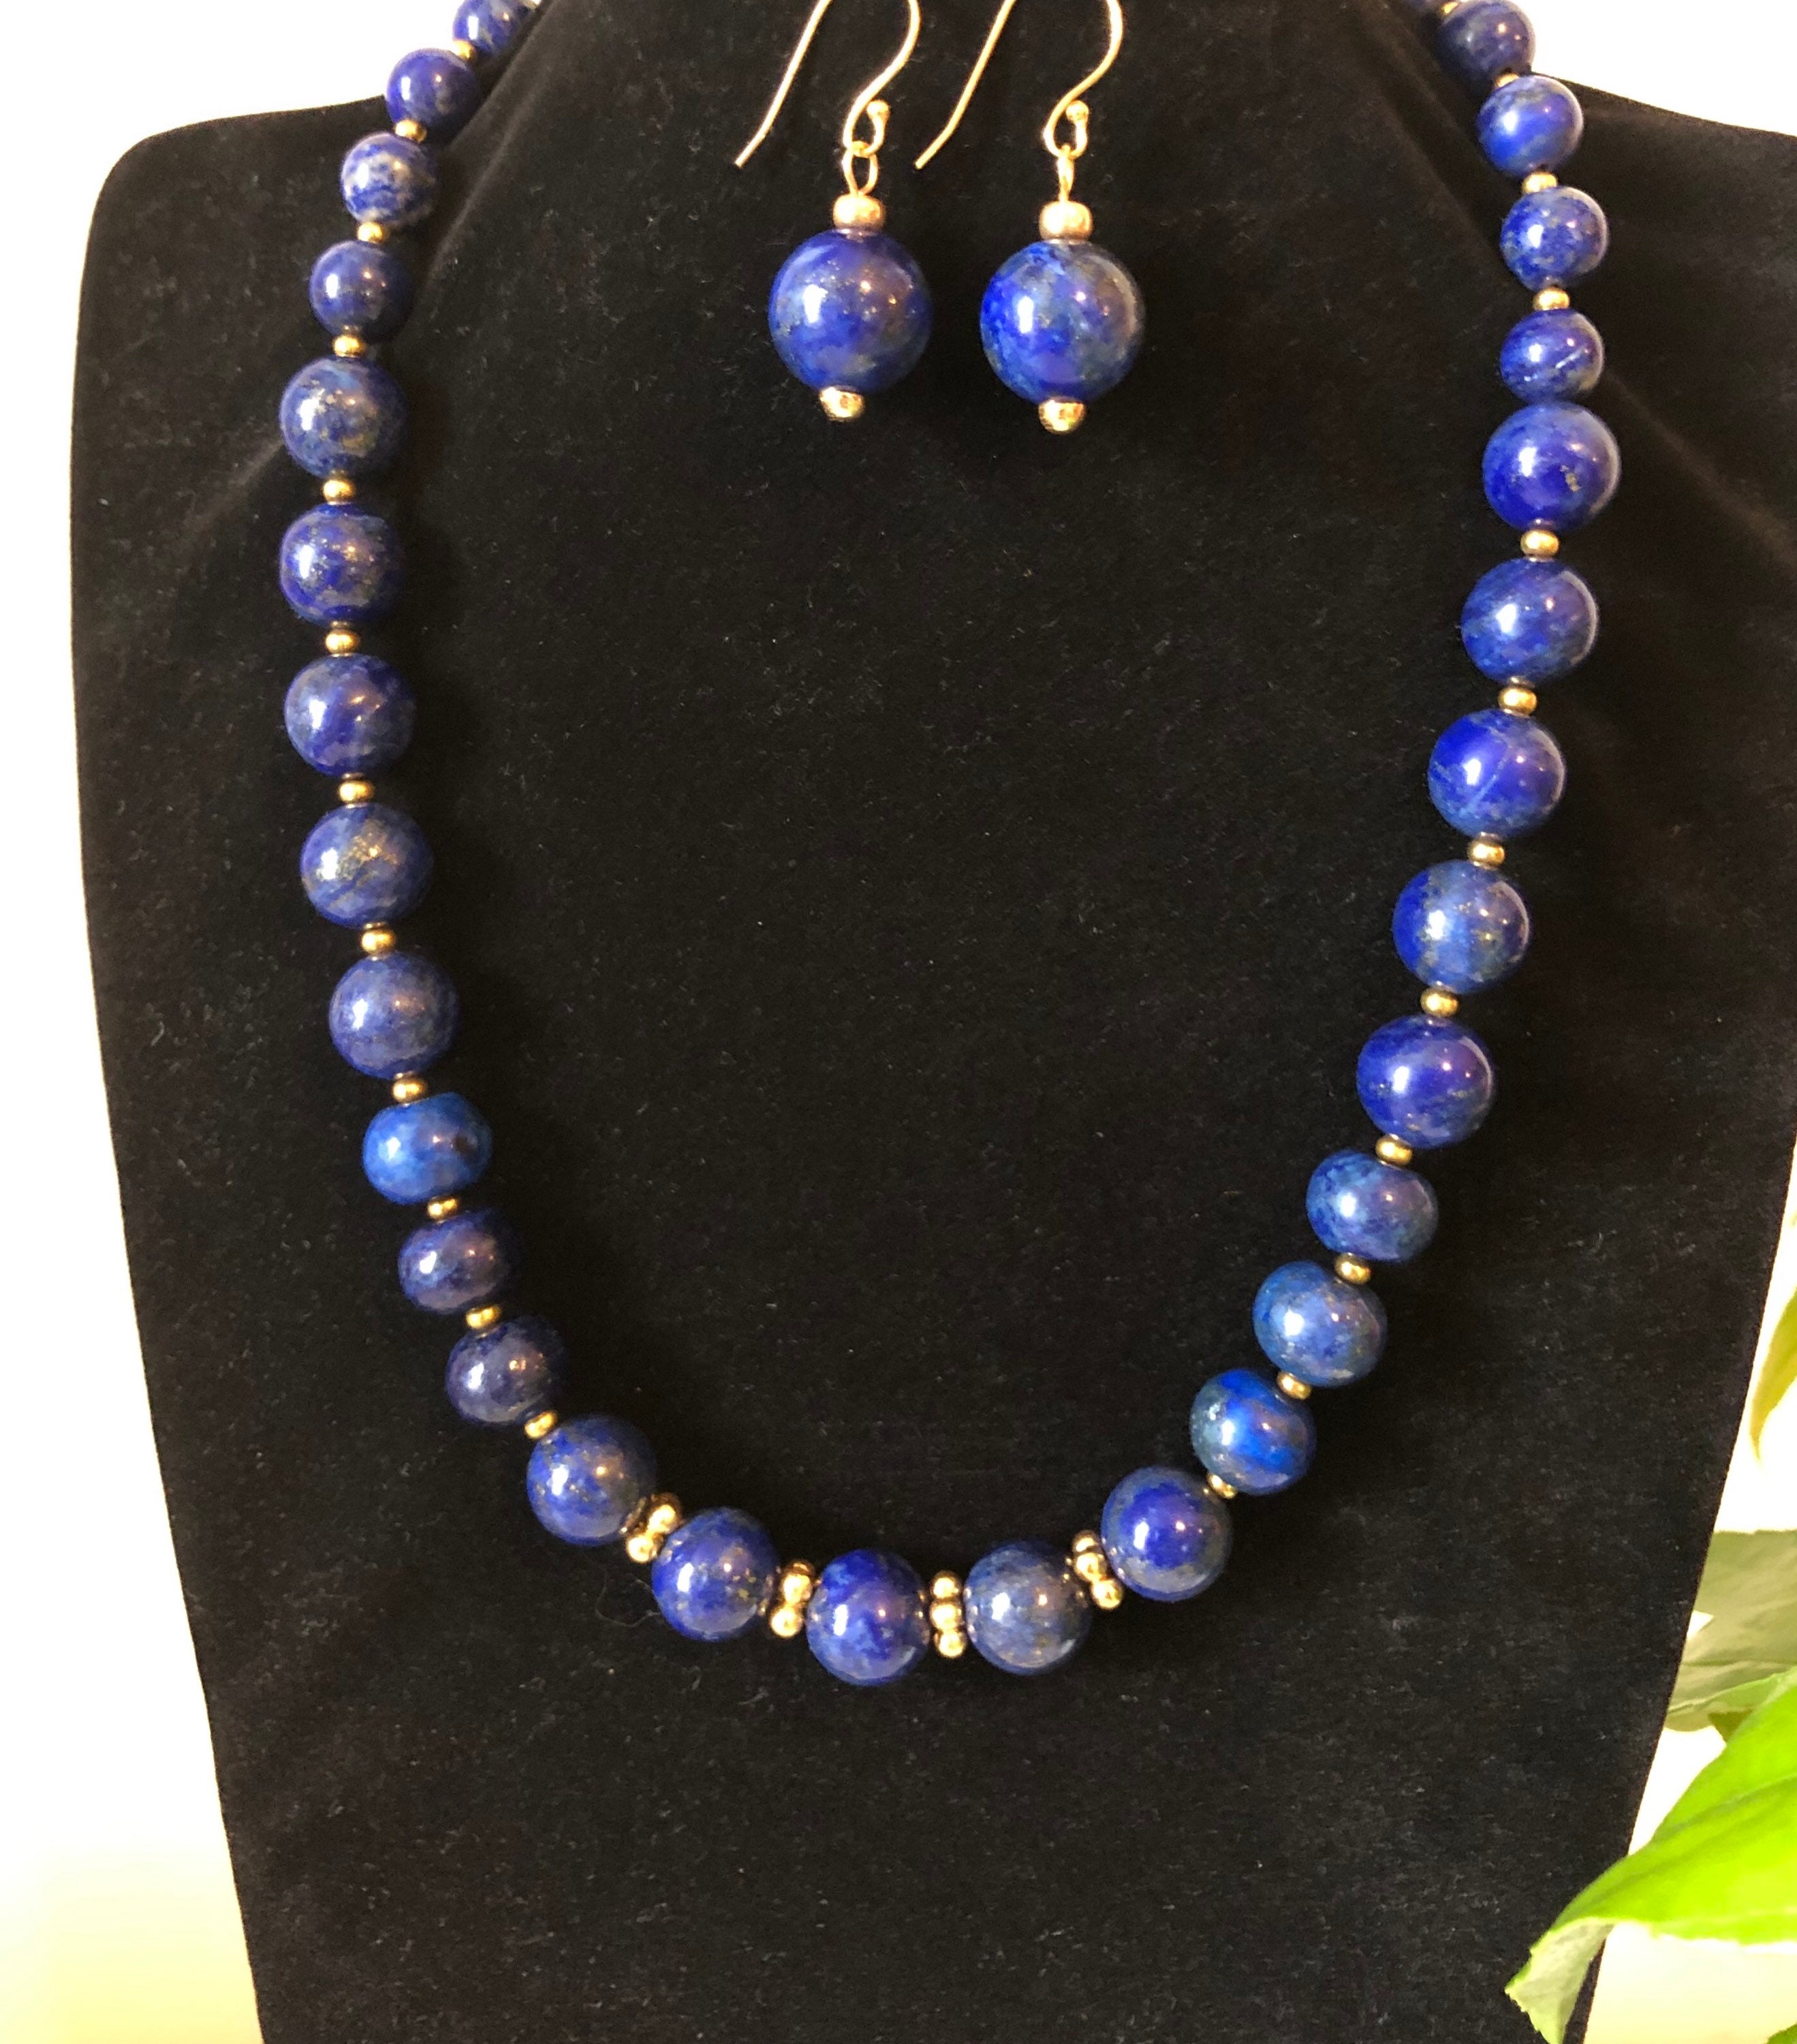 Lapis Lazuli Necklace and Earrings, Lapis Lazuli and Gold Necklace ...